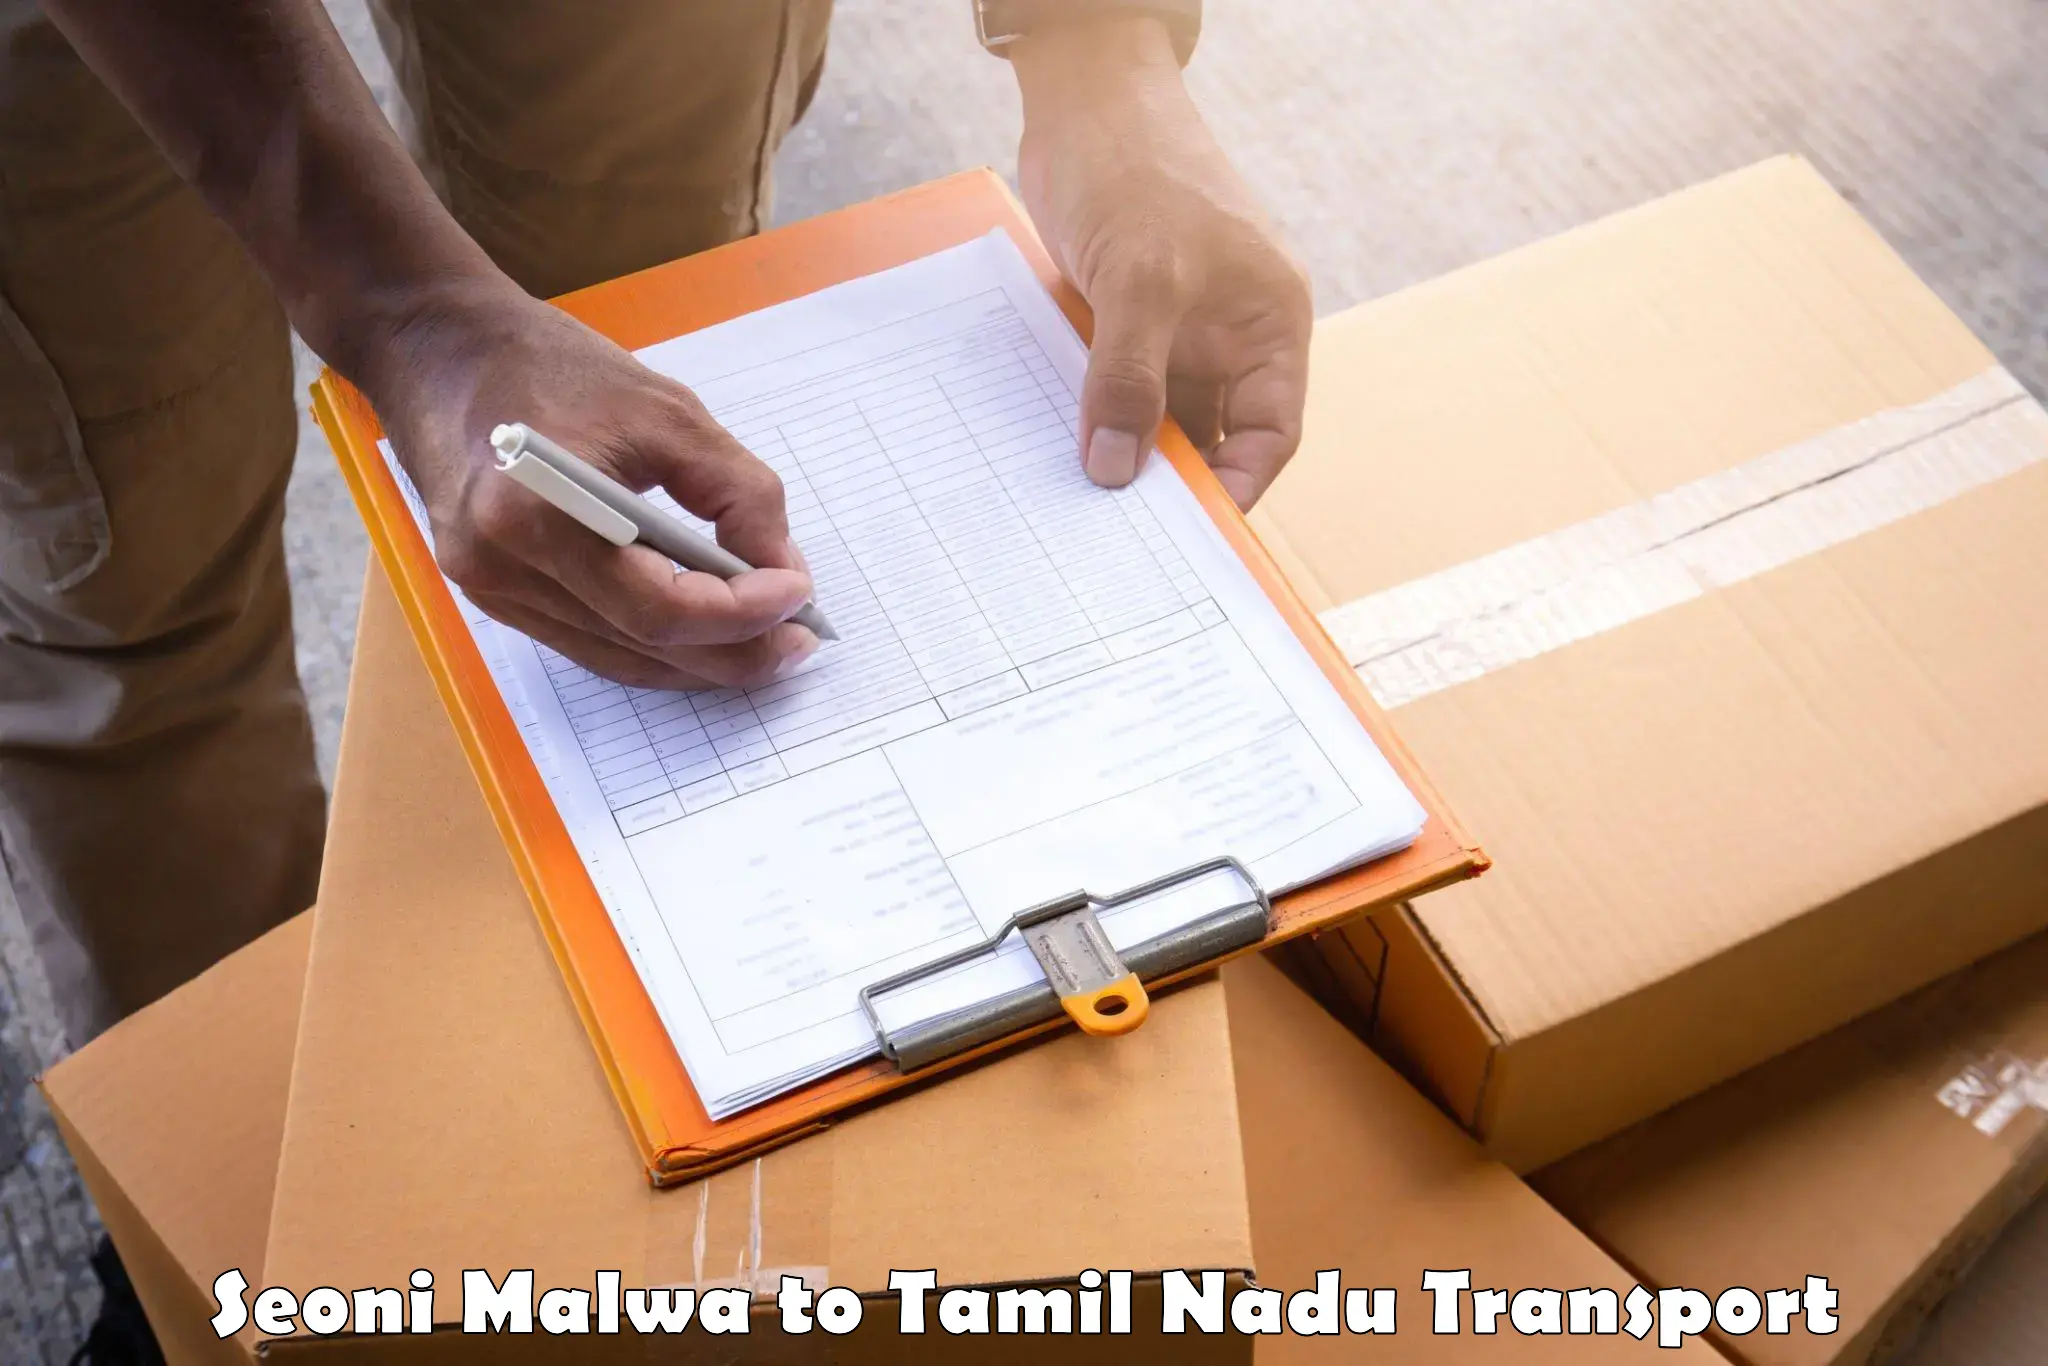 Package delivery services Seoni Malwa to Kovilpatti